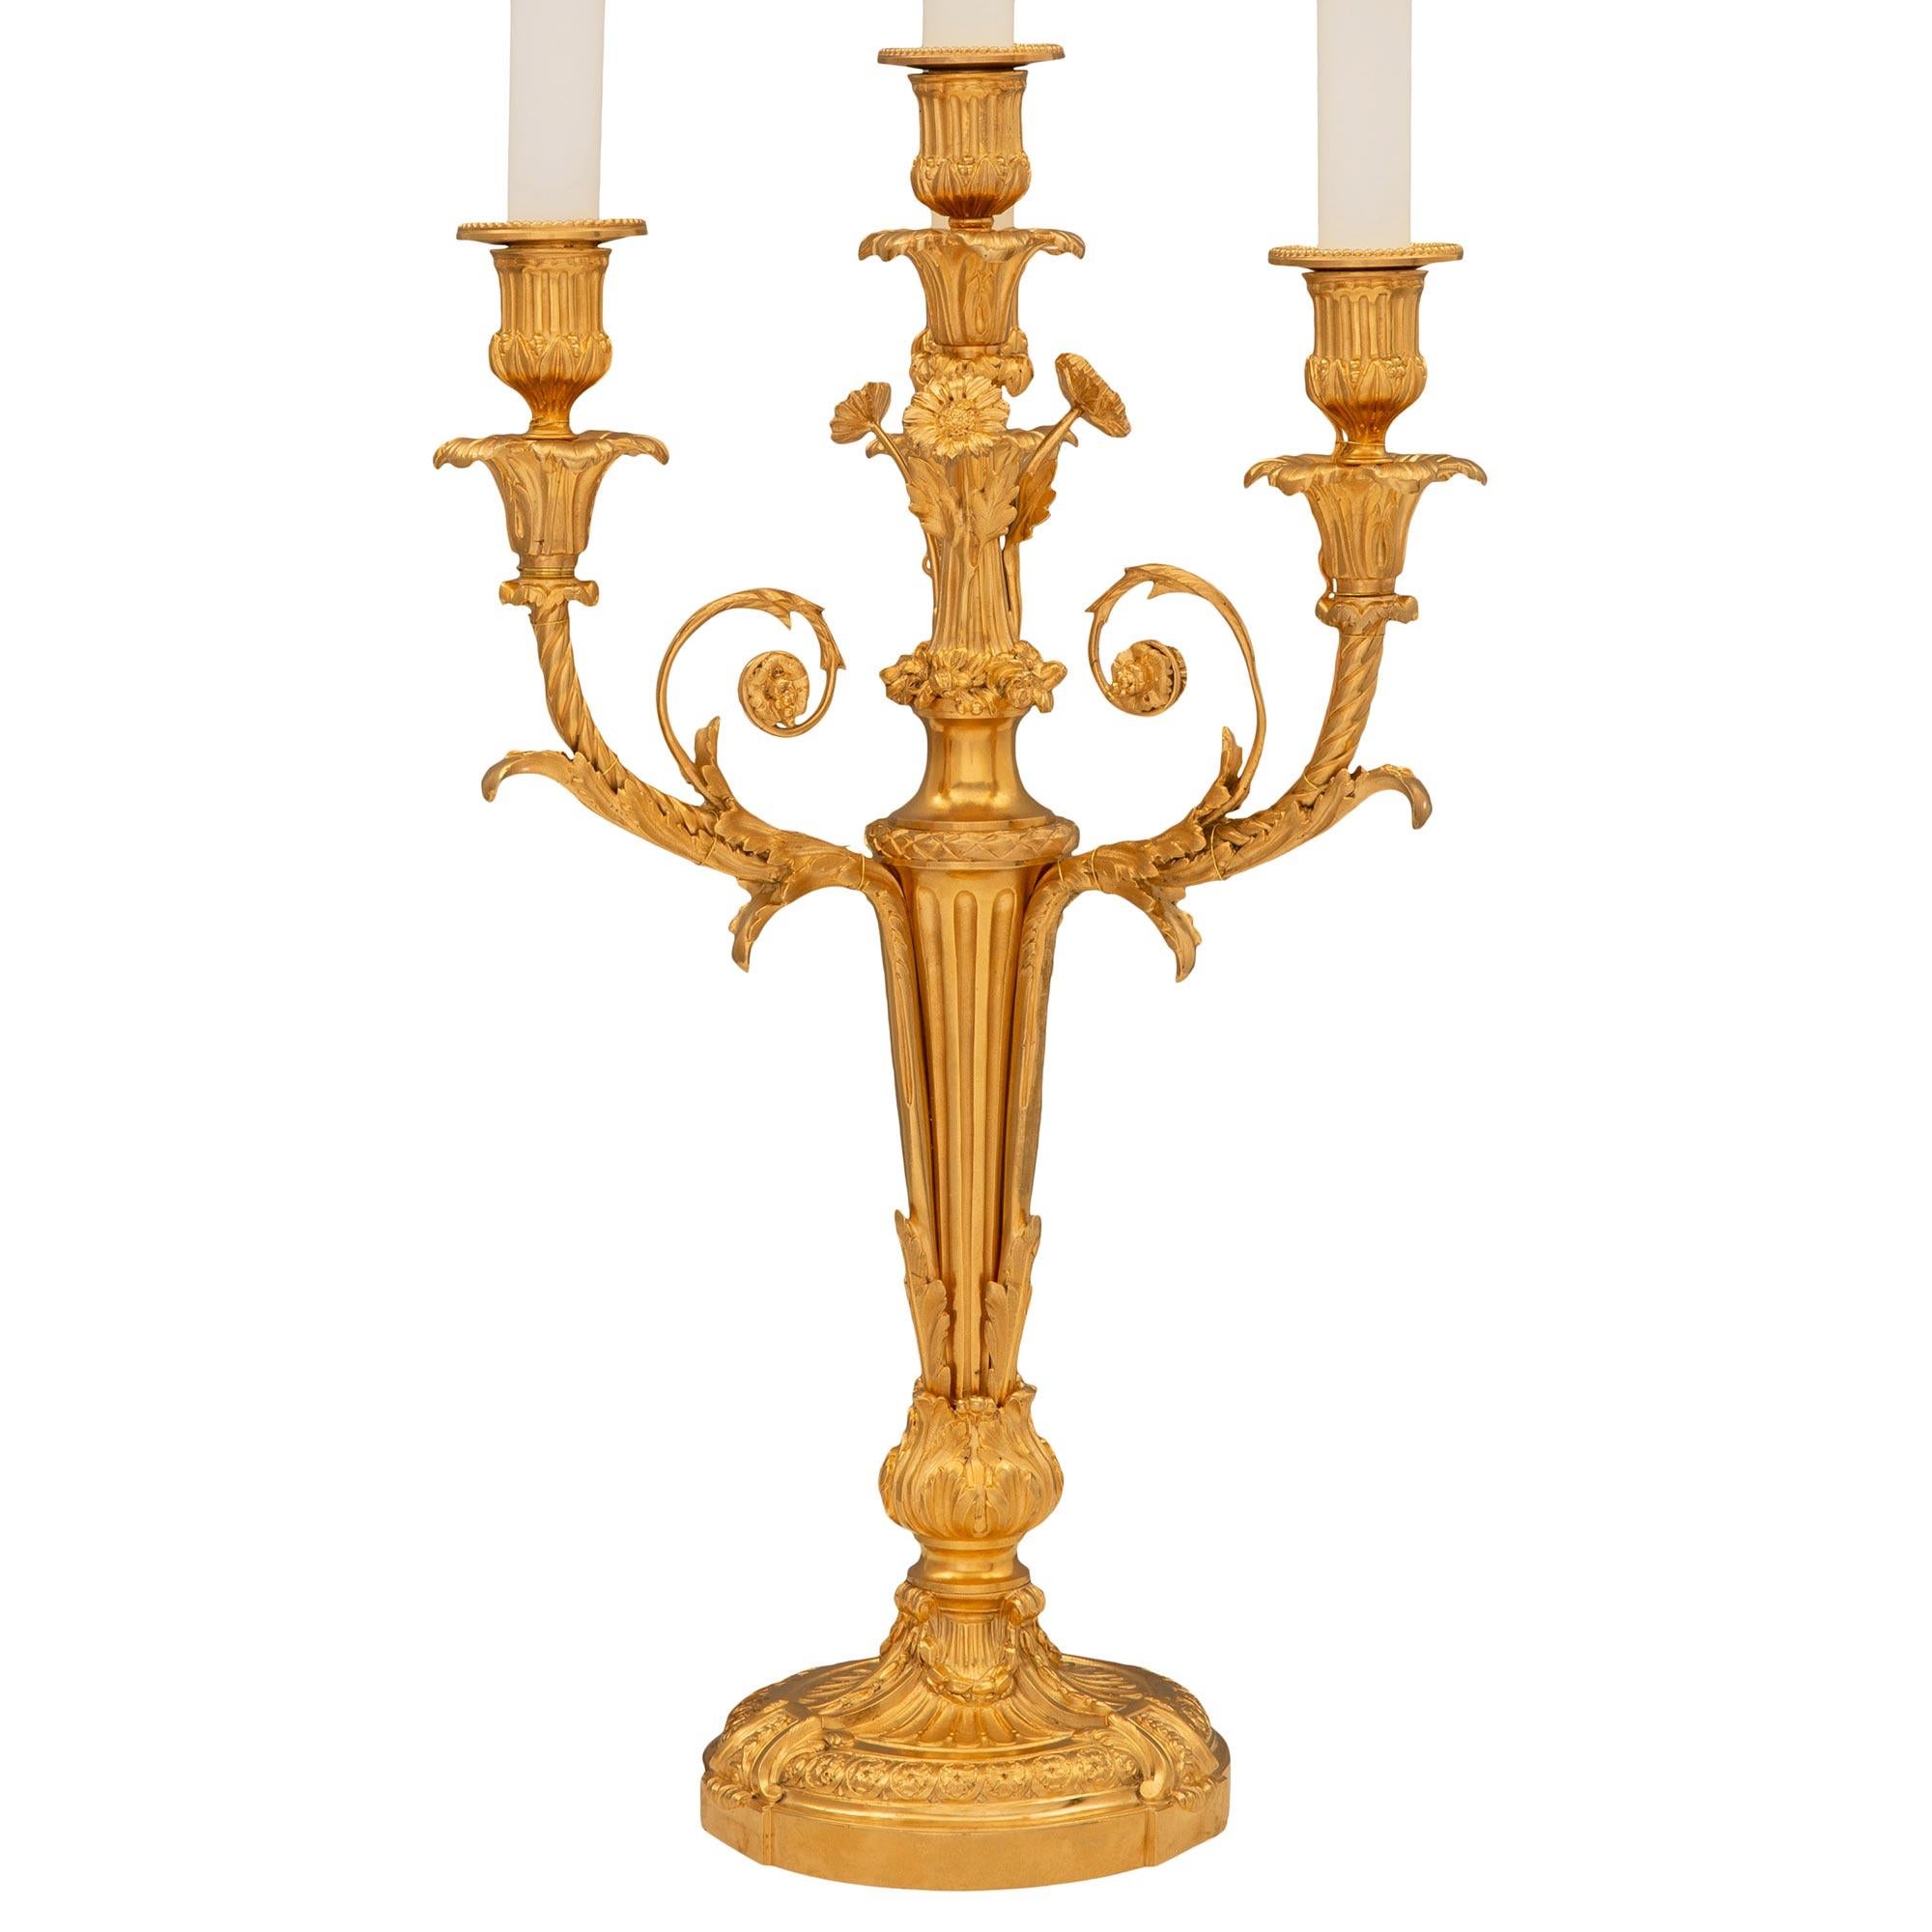 An elegant pair of French 19th century Louis XVI st. ormolu candelabra lamps. Each four arm lamp is raised by a circular base with a finely mottled wrap around band, striking interlocking geometric designs, lovely scrolled foliate movements, swaging